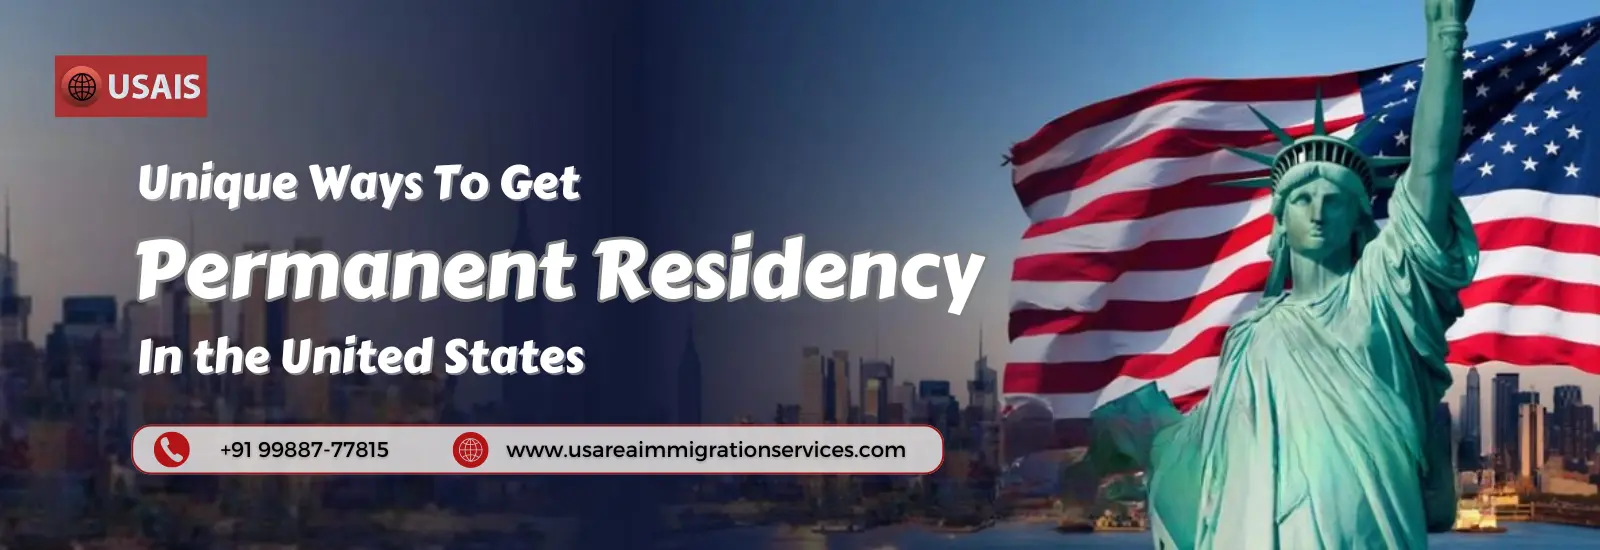 Permanent-Residency-In-The-United-States